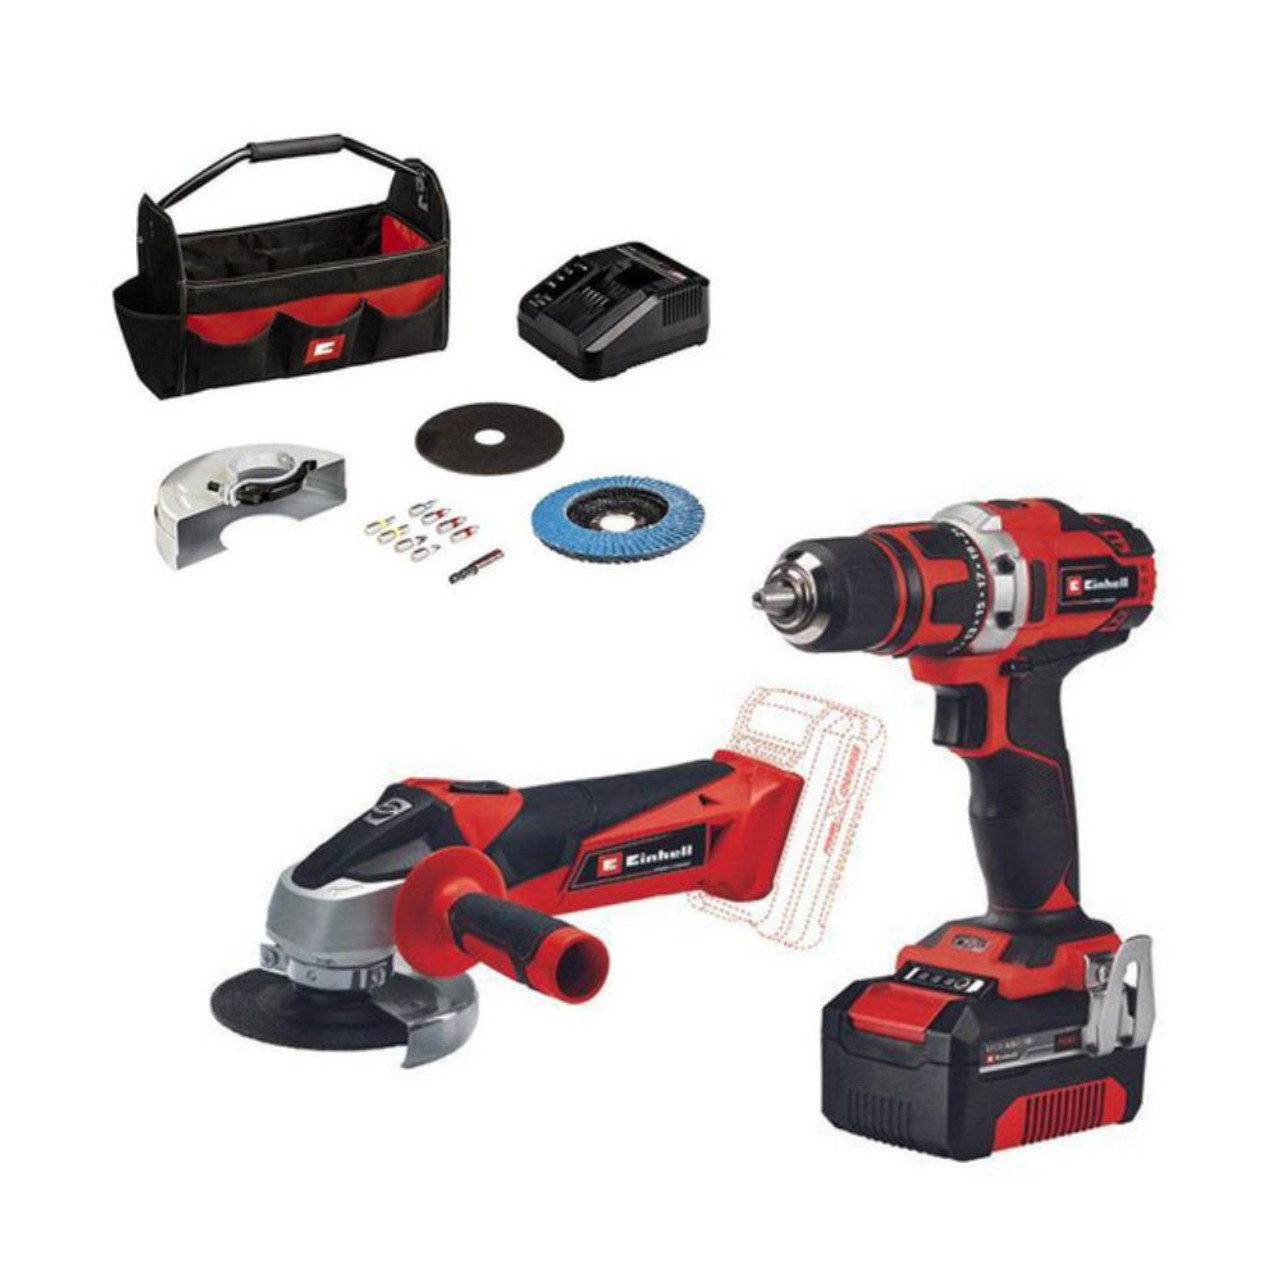  Einhell Power X-Change 18-Volt 3.0-Ah Lithium-Ion Starter Kit,  Includes Battery and Fast Charger : Automotive